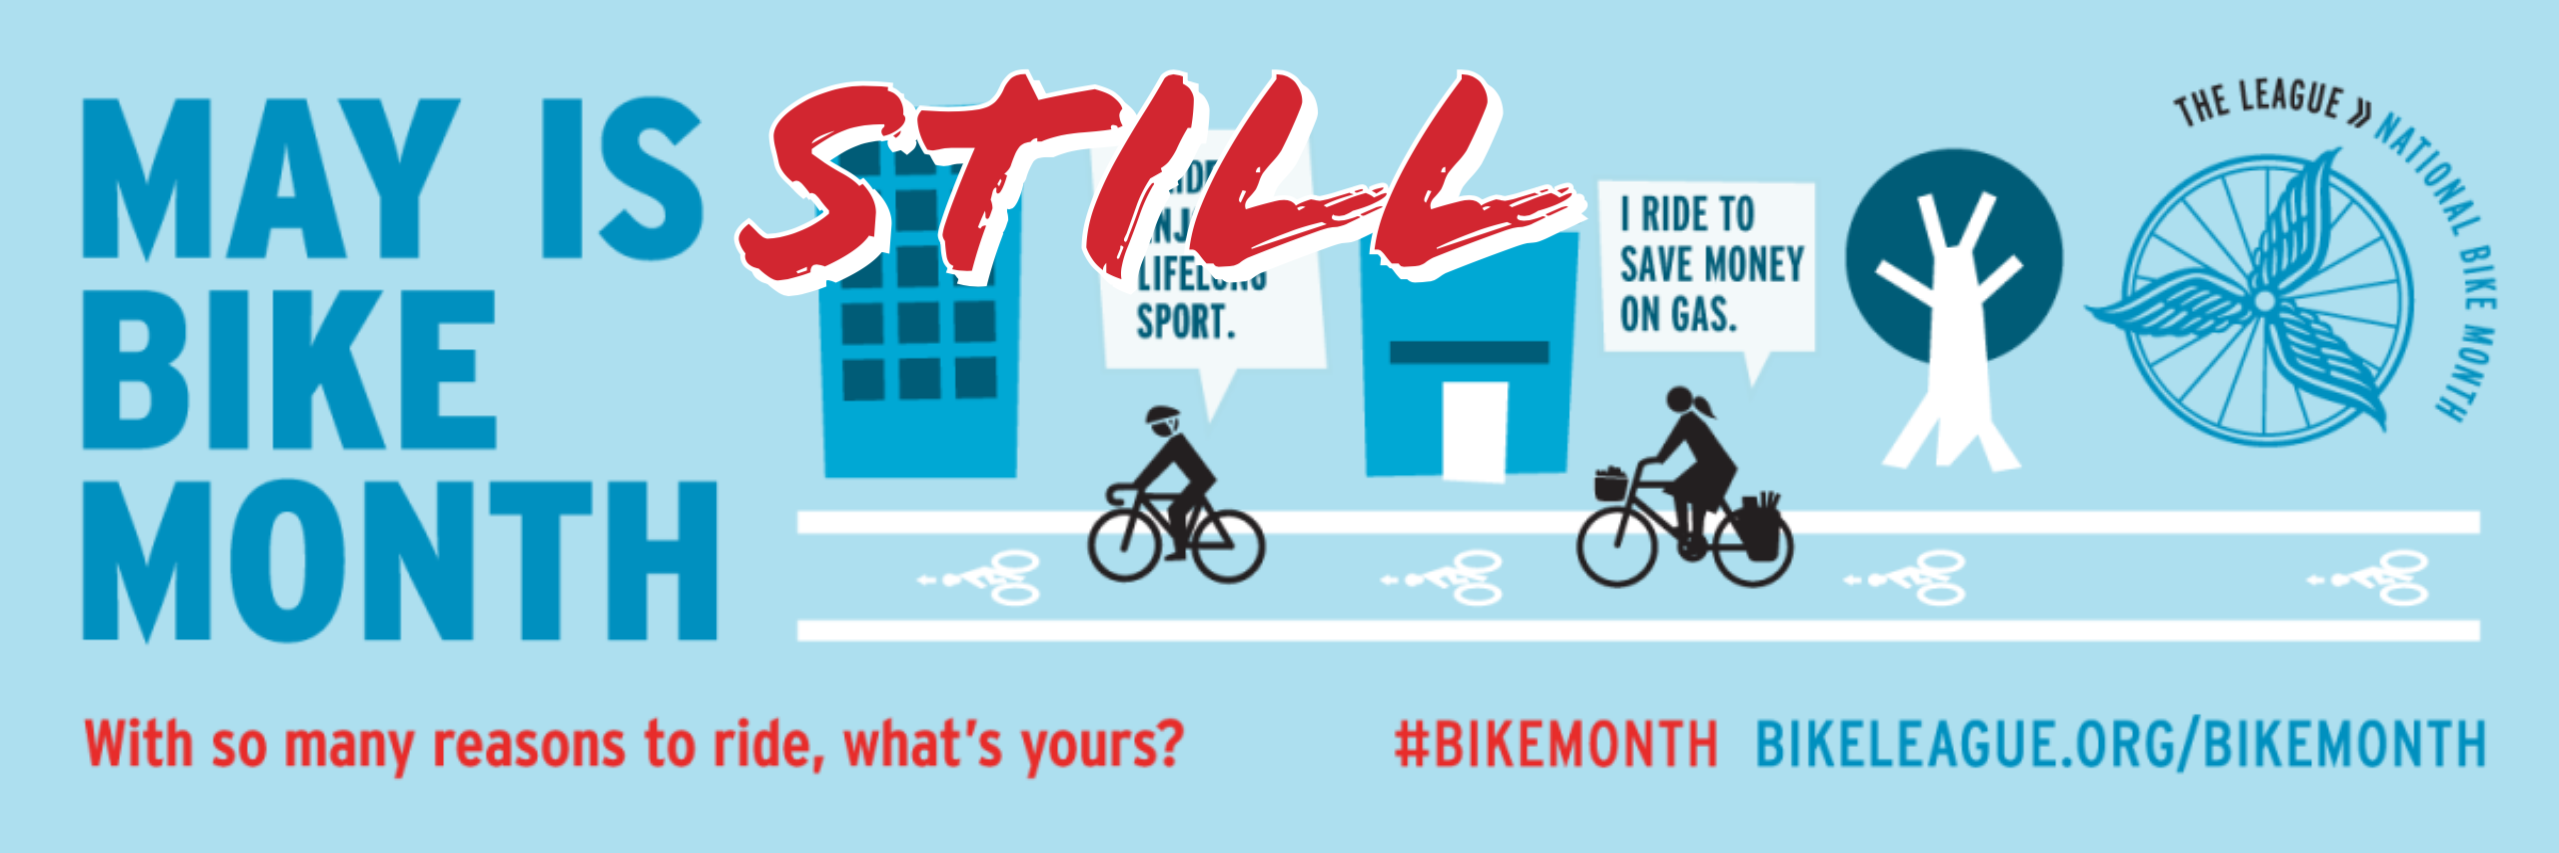 may is bike month